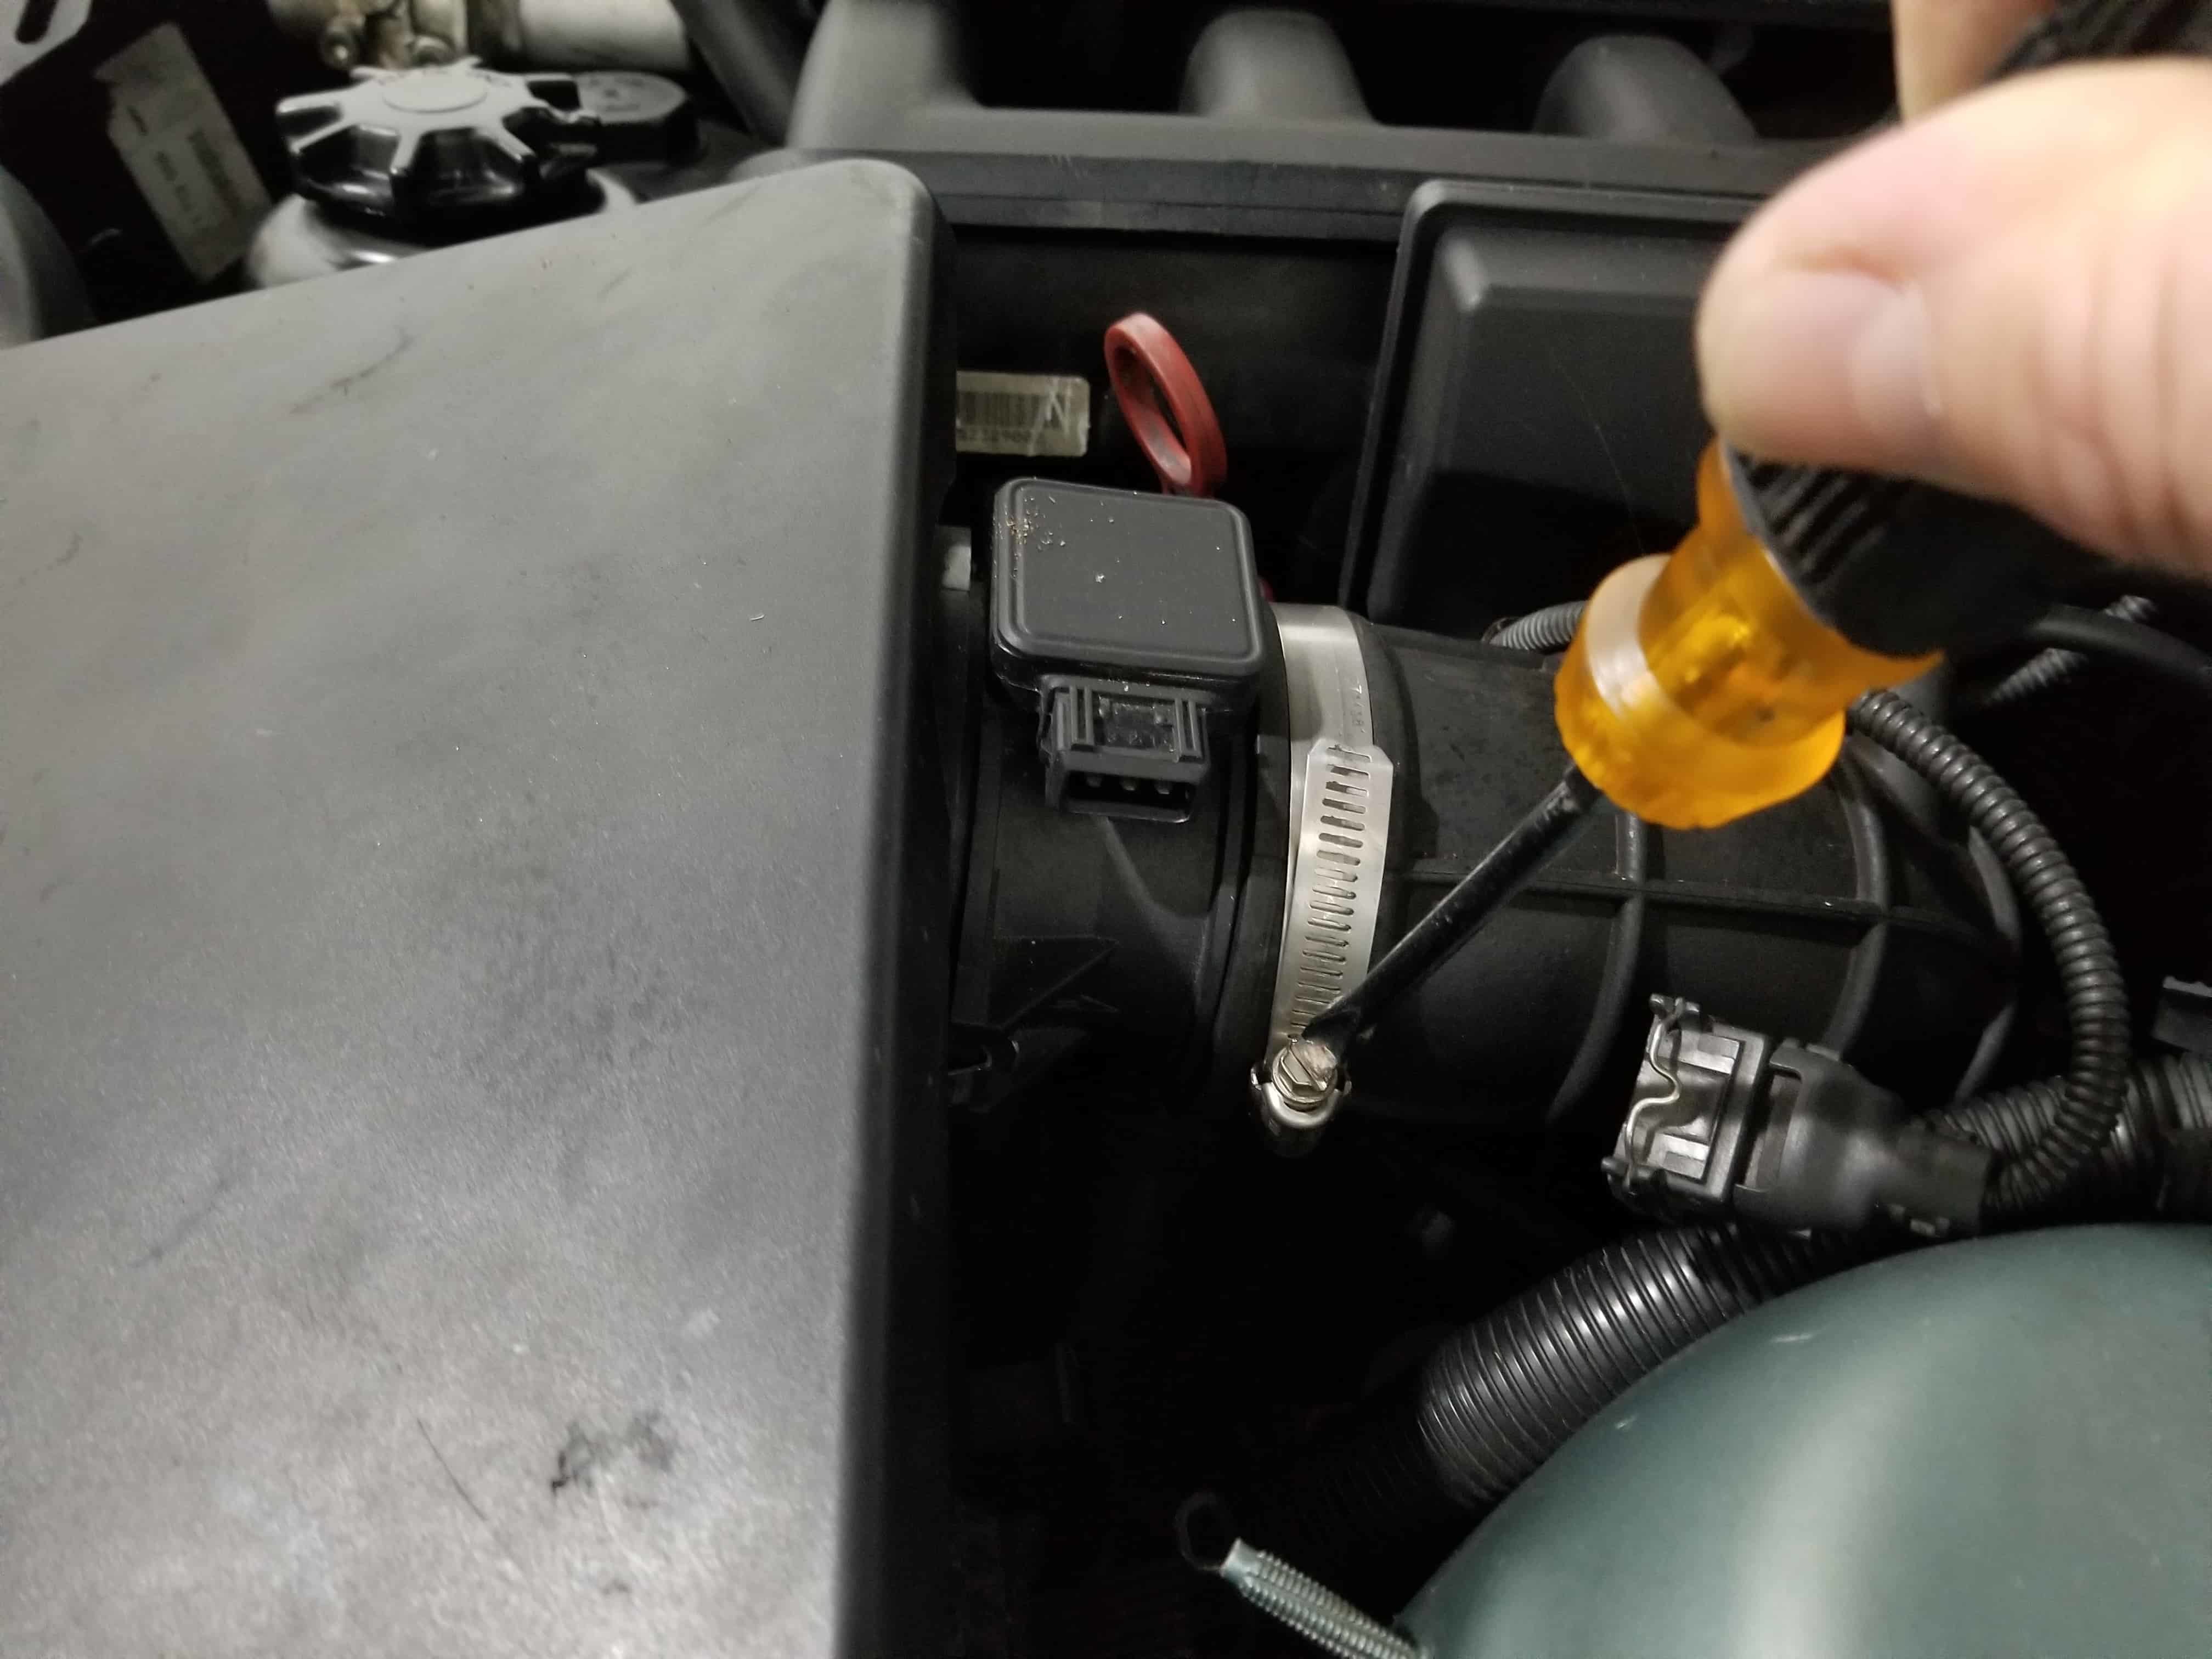 BMW E46 thermostat - loosen the intake boot clamp